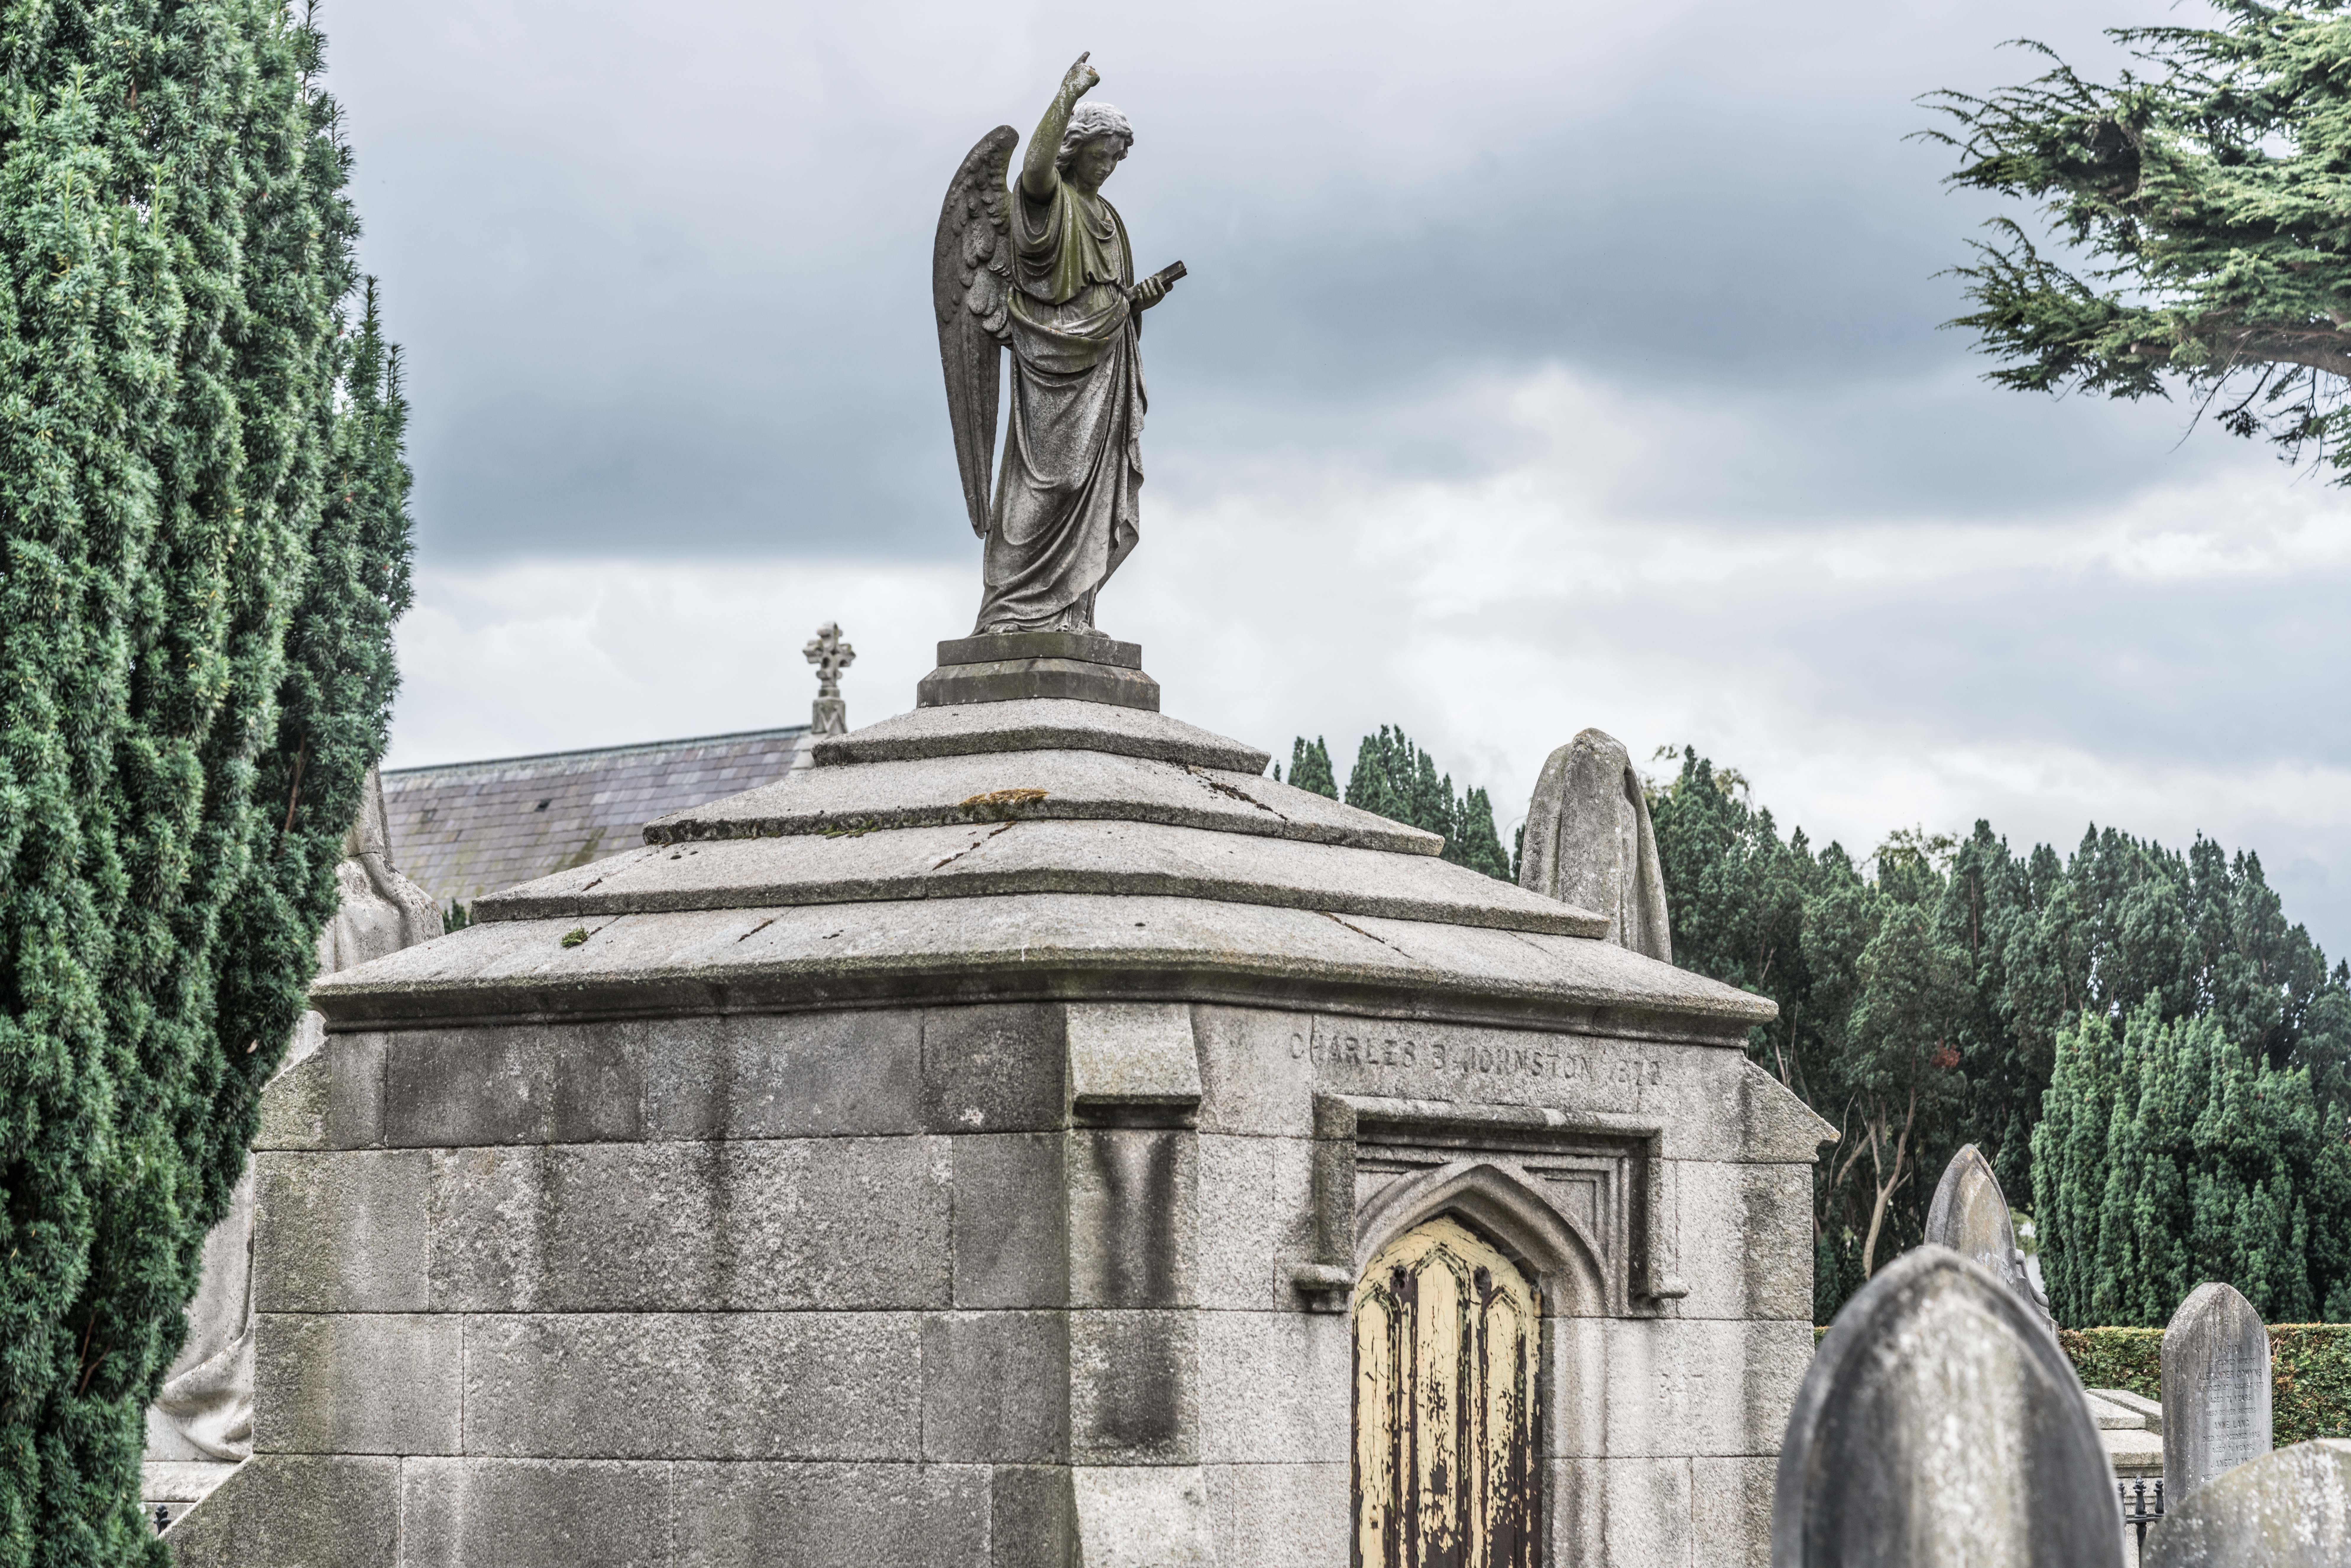  Mount Jerome Cemetery - August 2017 010 